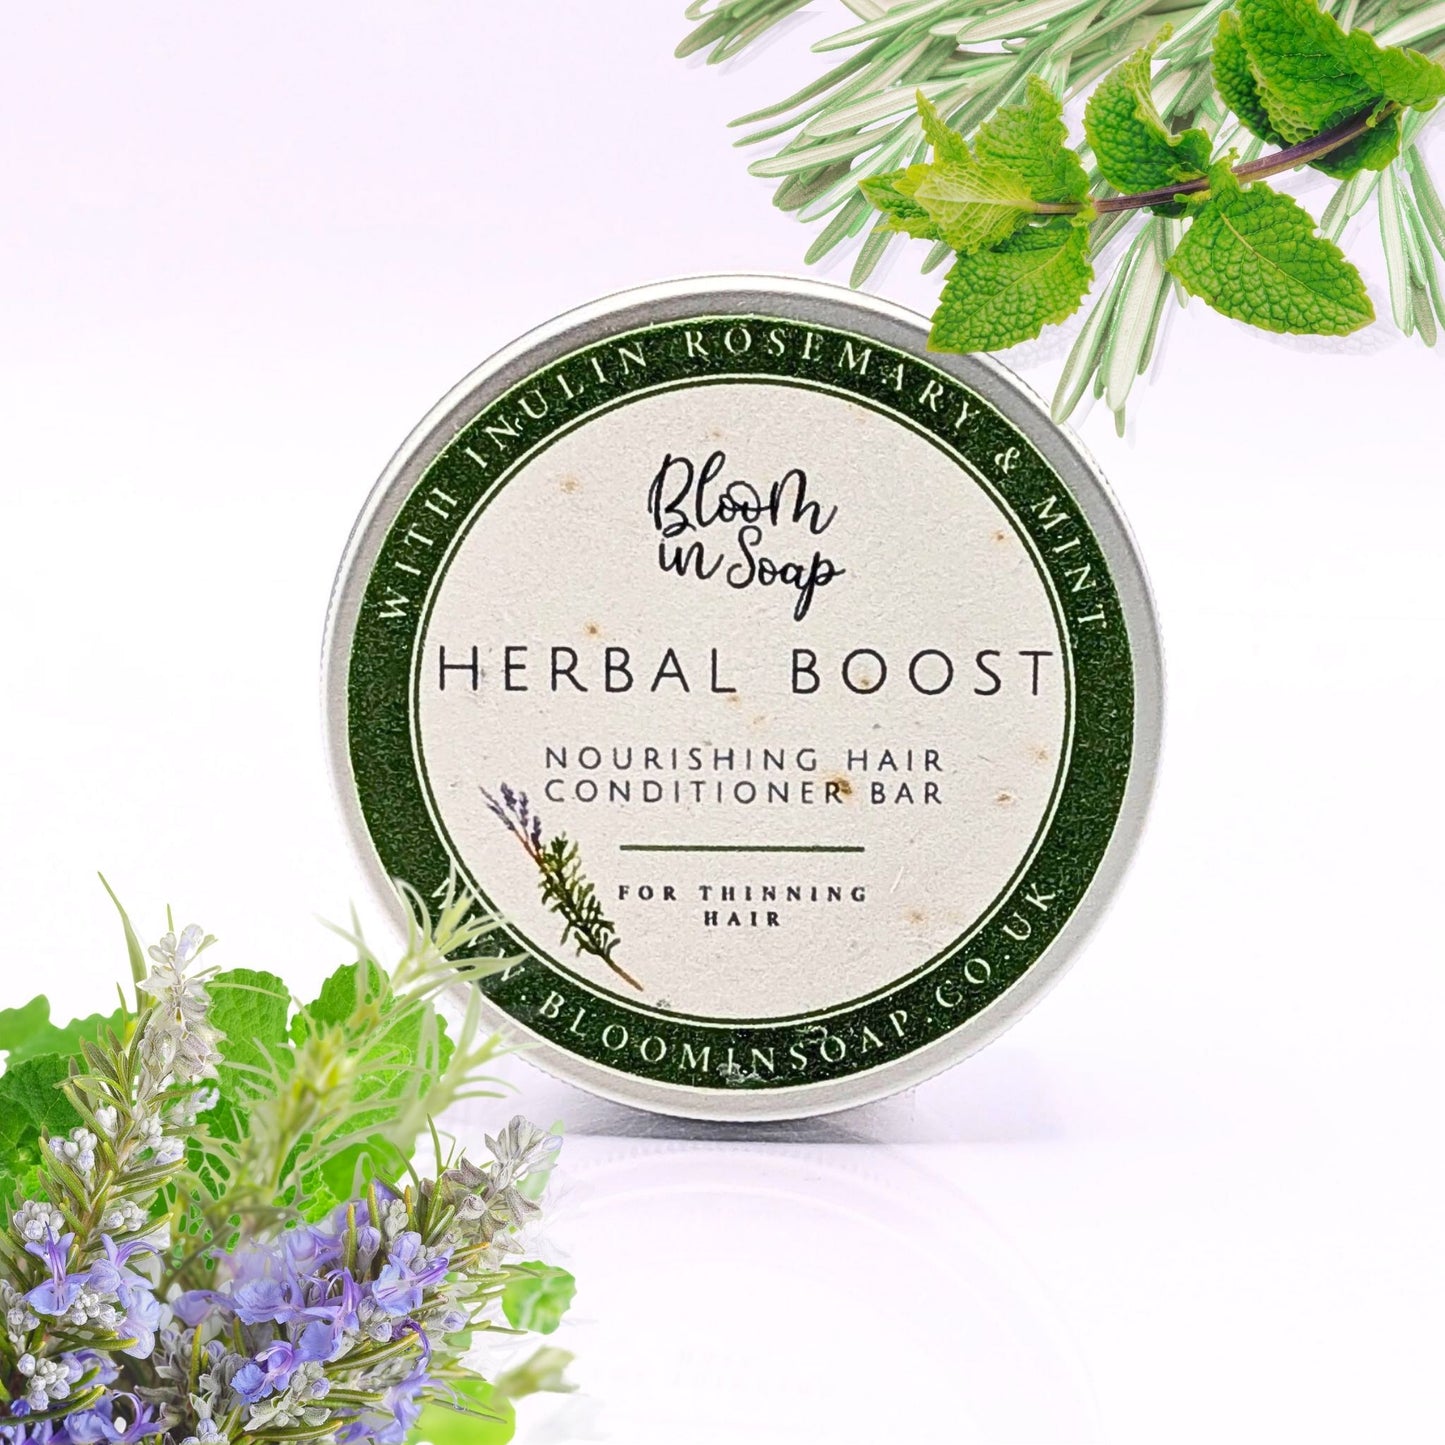 Herbal Boost conditioner bars from Bloom In Soap